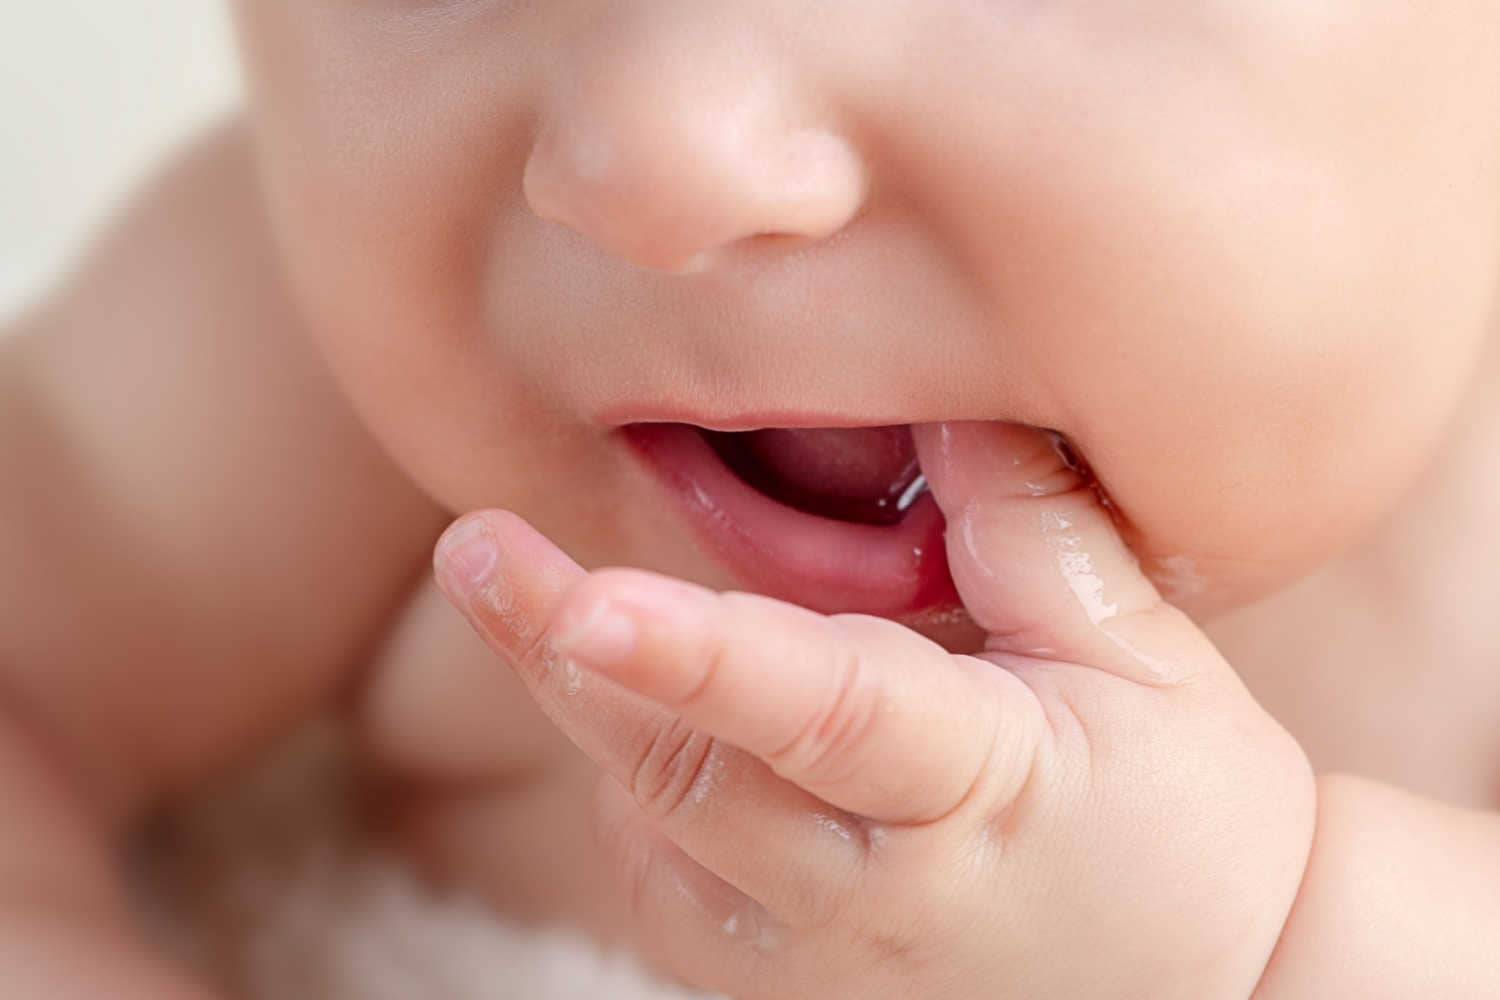 Sore Gums in Babies – Top Causes and Precautions